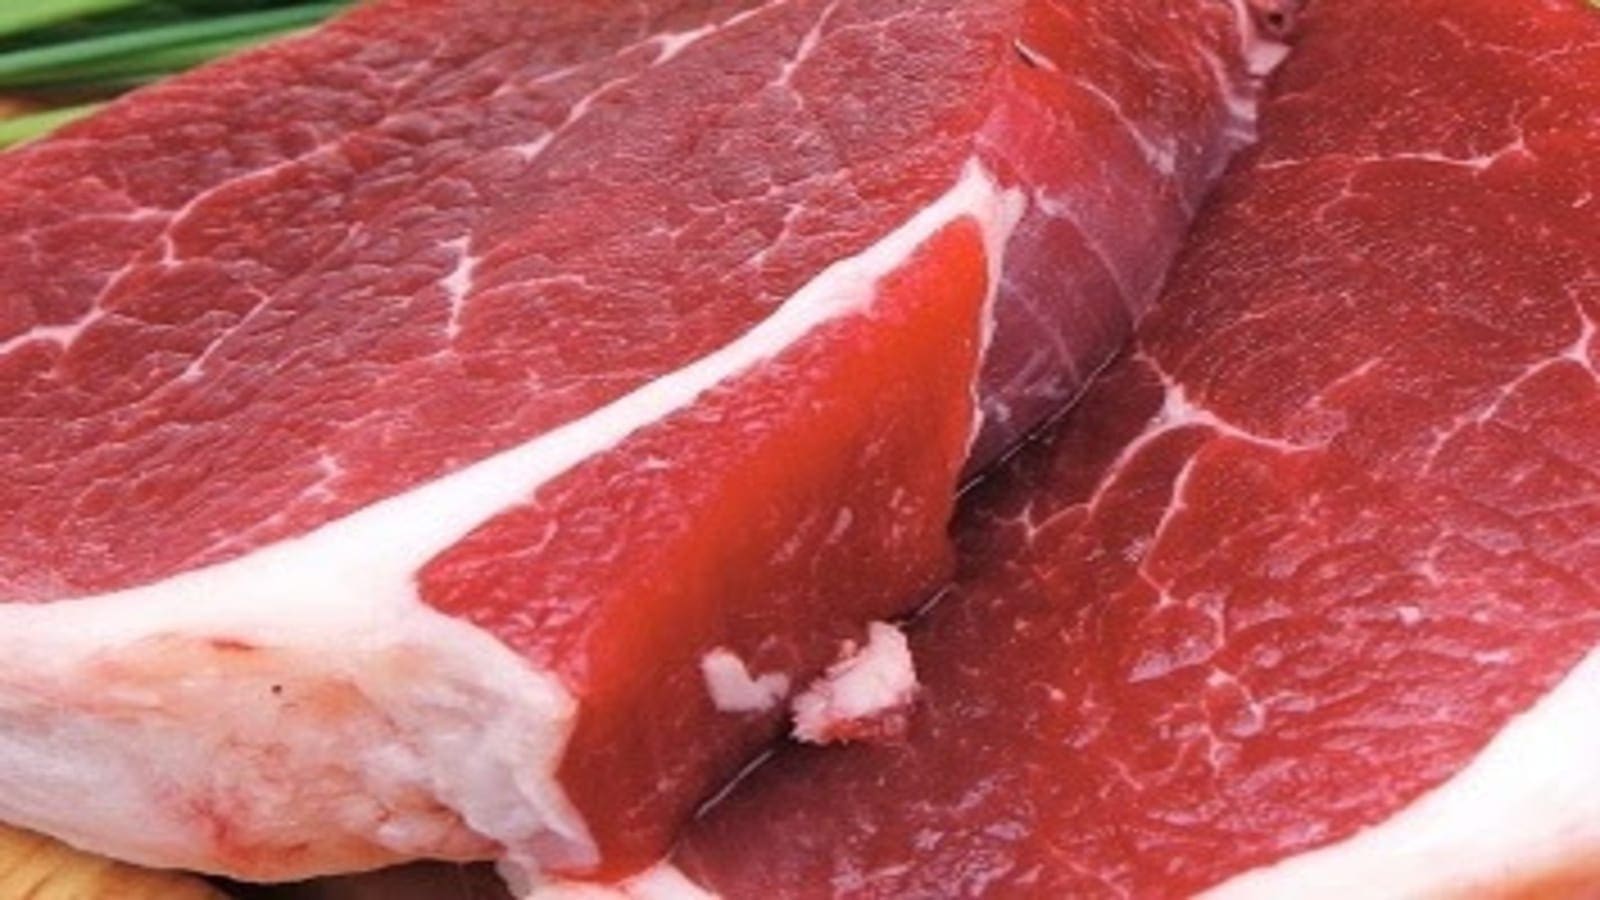 Pork shortage bites Namibia as foot and mouth disease restricts imports 